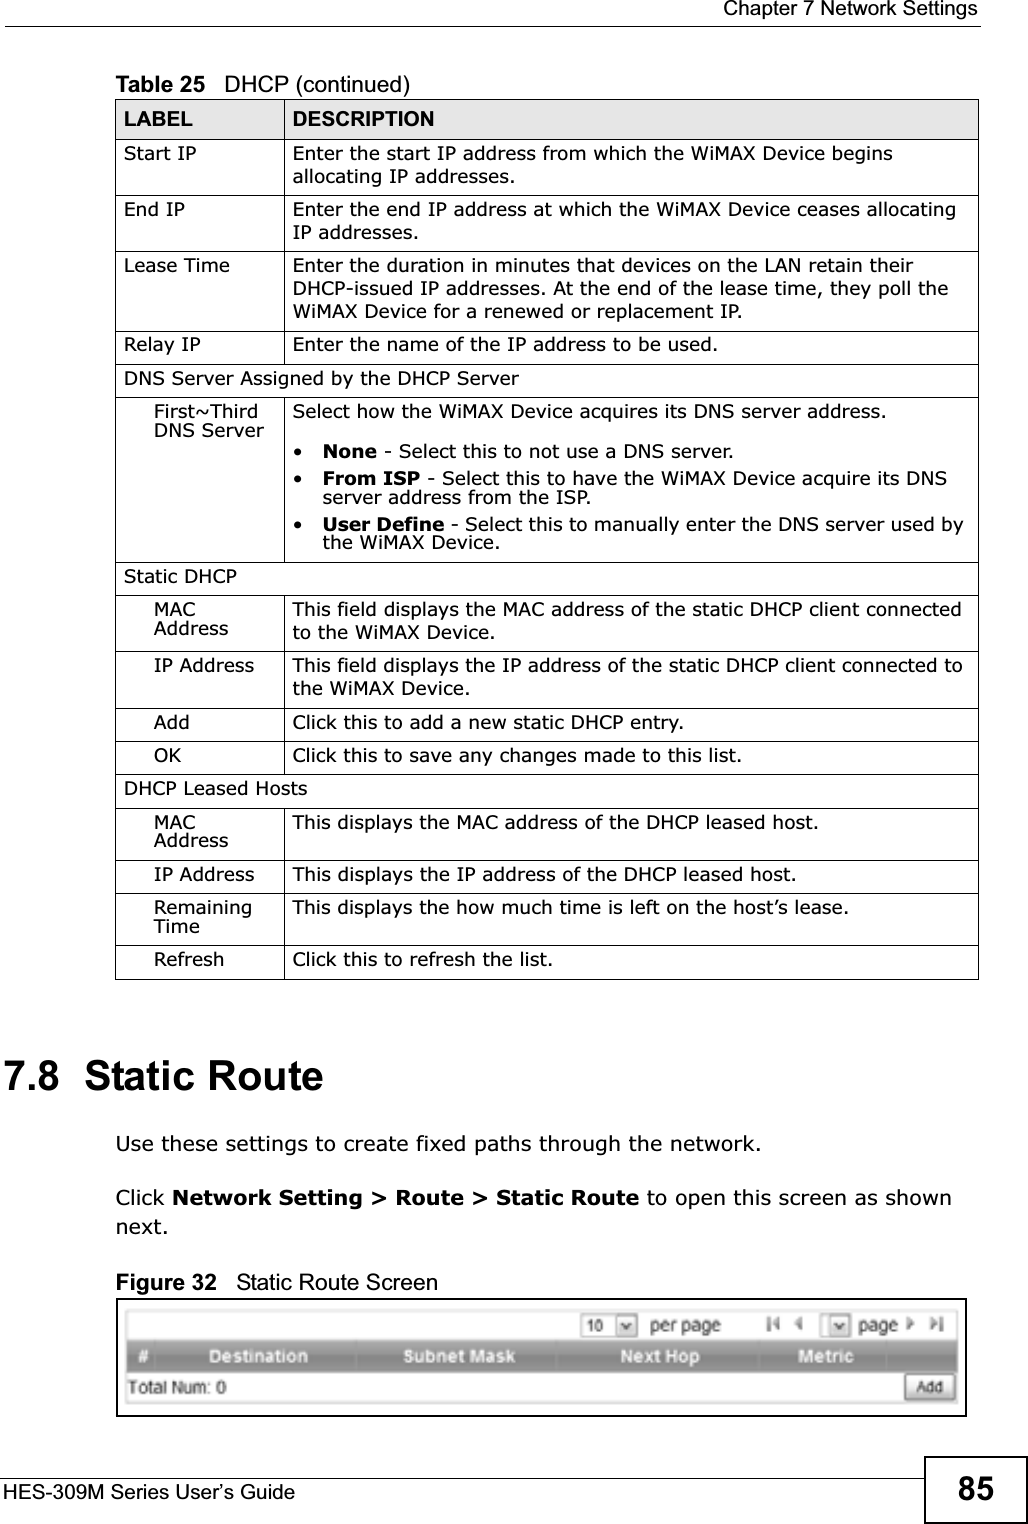  Chapter 7 Network SettingsHES-309M Series User’s Guide 857.8  Static RouteUse these settings to create fixed paths through the network.Click Network Setting &gt; Route &gt; Static Route to open this screen as shown next.Figure 32   Static Route ScreenStart IP Enter the start IP address from which the WiMAX Device begins allocating IP addresses.End IP Enter the end IP address at which the WiMAX Device ceases allocating IP addresses.Lease Time Enter the duration in minutes that devices on the LAN retain their DHCP-issued IP addresses. At the end of the lease time, they poll the WiMAX Device for a renewed or replacement IP.Relay IP Enter the name of the IP address to be used.DNS Server Assigned by the DHCP ServerFirst~Third DNS Server Select how the WiMAX Device acquires its DNS server address.•None - Select this to not use a DNS server.•From ISP - Select this to have the WiMAX Device acquire its DNS server address from the ISP.•User Define - Select this to manually enter the DNS server used by the WiMAX Device.Static DHCPMACAddress This field displays the MAC address of the static DHCP client connected to the WiMAX Device.IP Address This field displays the IP address of the static DHCP client connected to the WiMAX Device.Add Click this to add a new static DHCP entry.OK Click this to save any changes made to this list.DHCP Leased HostsMACAddress This displays the MAC address of the DHCP leased host.IP Address This displays the IP address of the DHCP leased host.Remaining Time This displays the how much time is left on the host’s lease.Refresh Click this to refresh the list.Table 25   DHCP (continued)LABEL DESCRIPTION